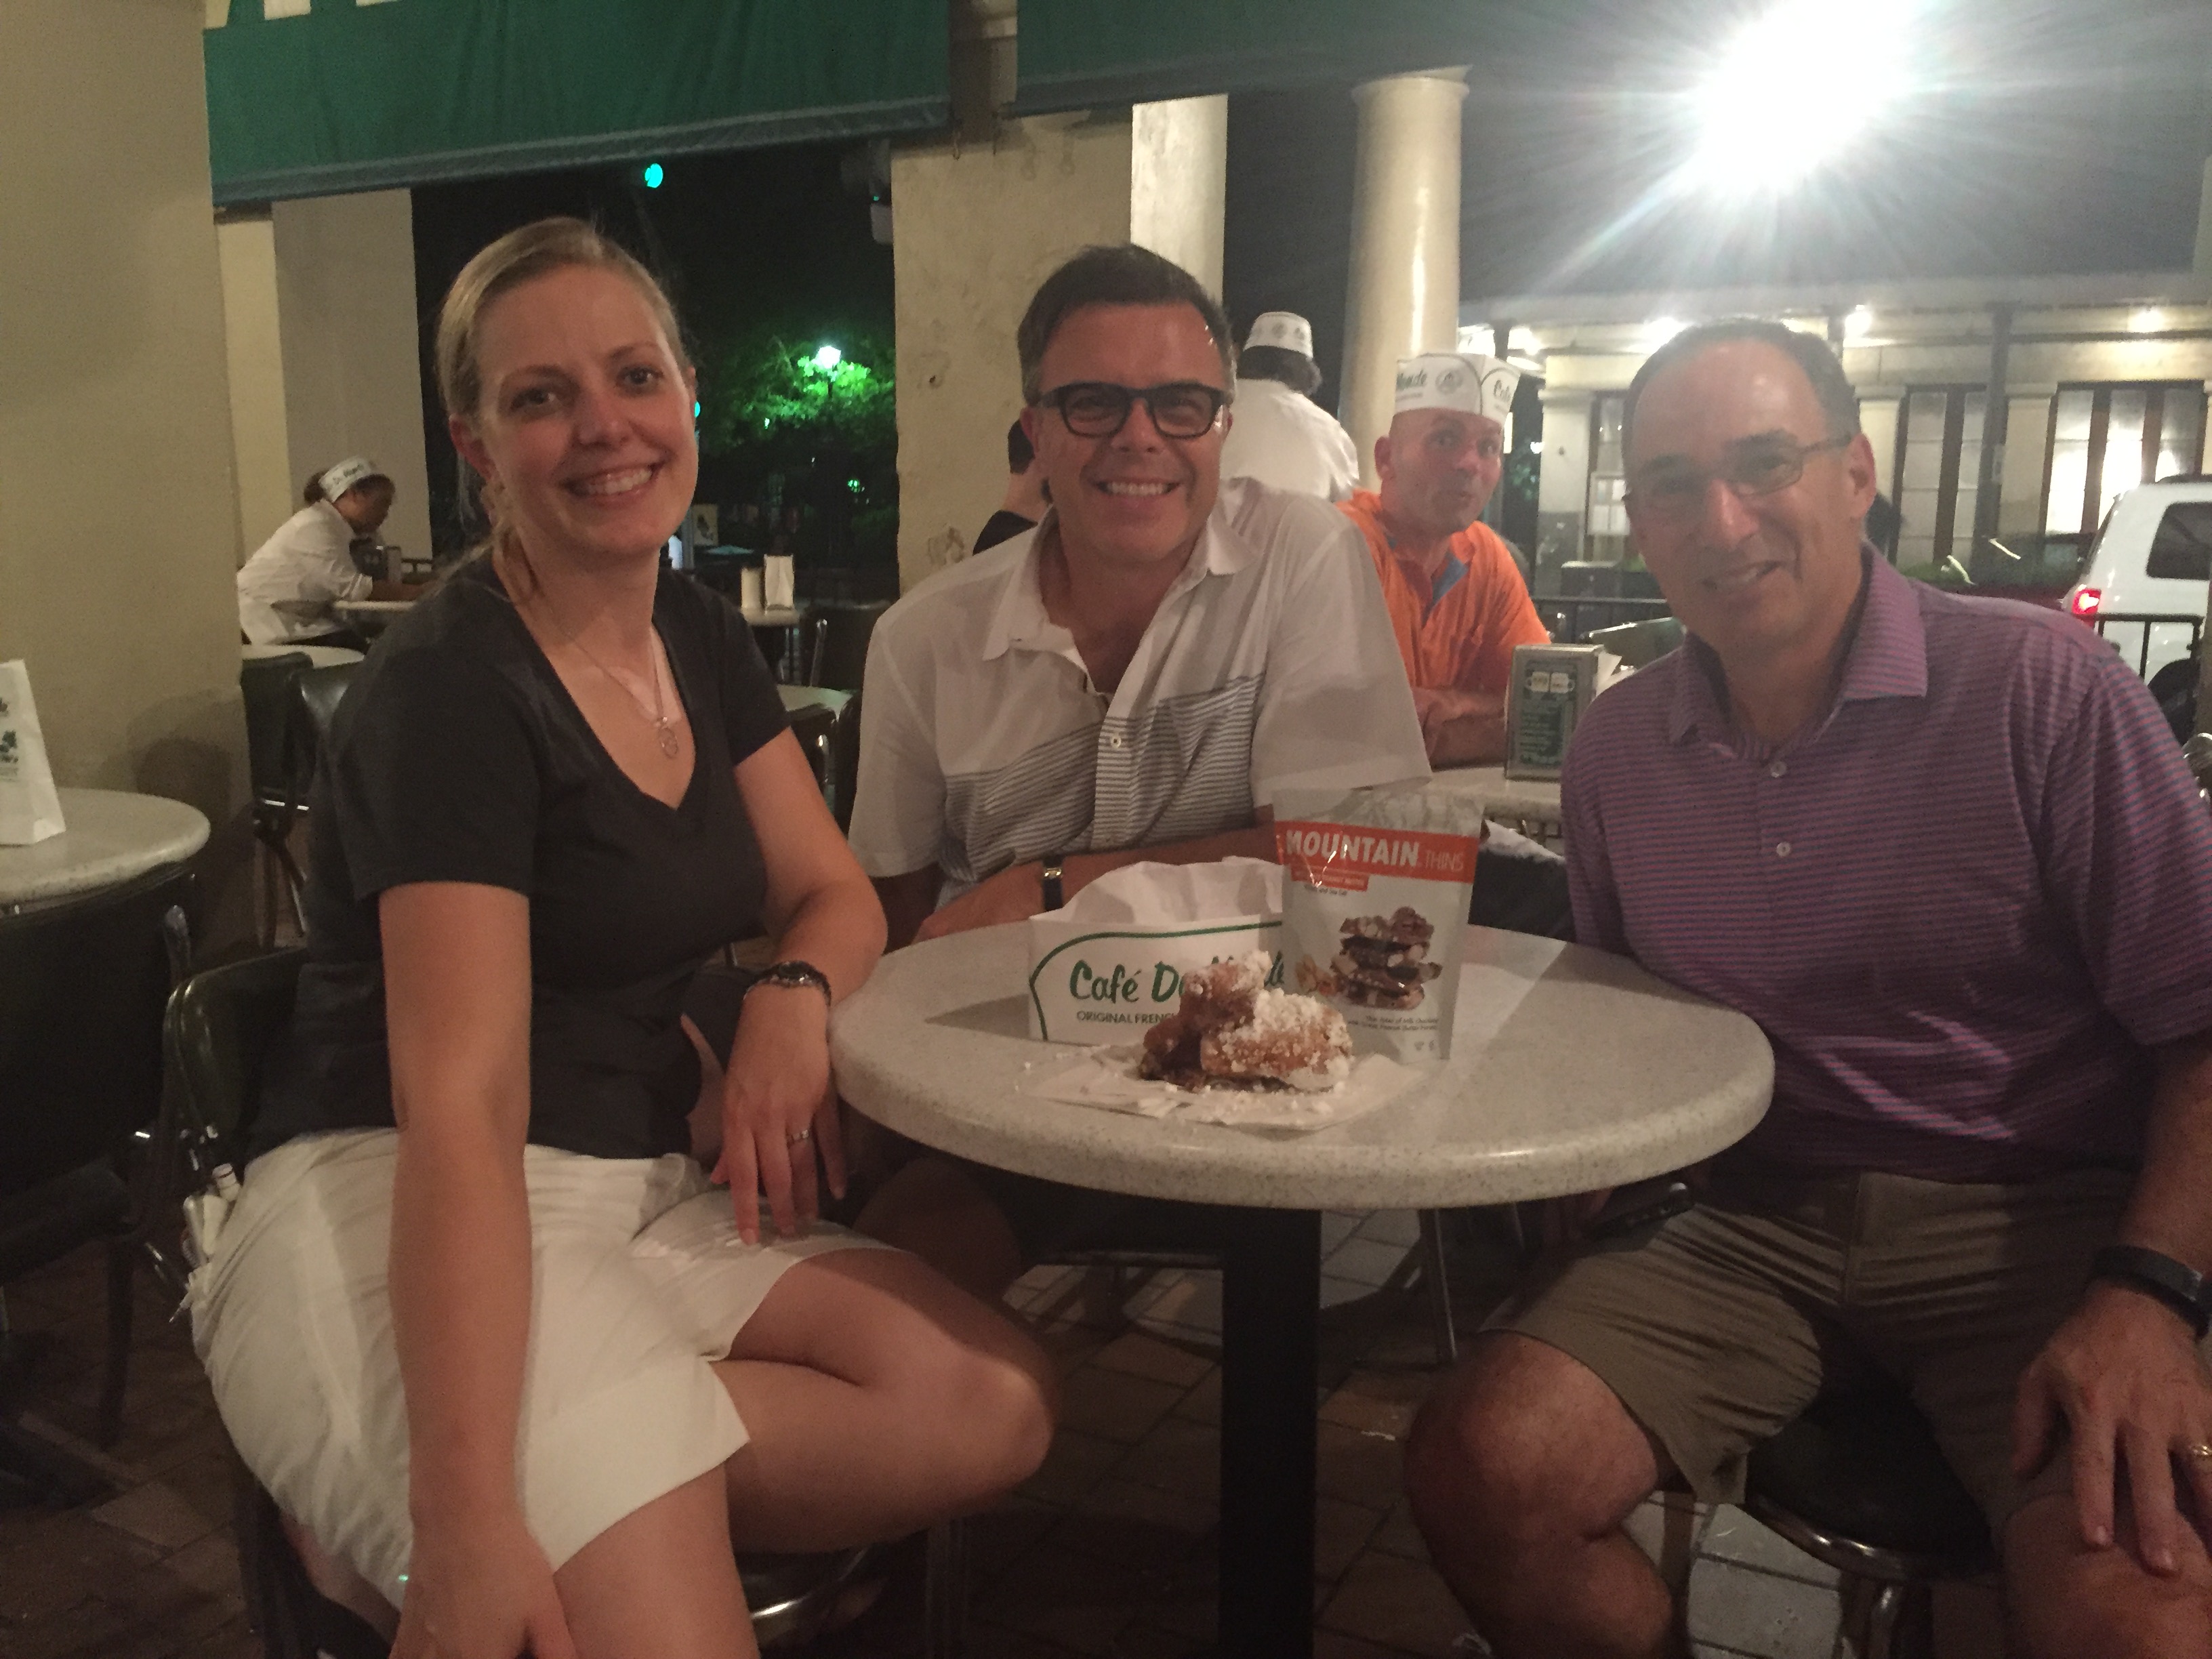 Attendees enjoying a New Orleans late night snack at Cafe Du Monde.